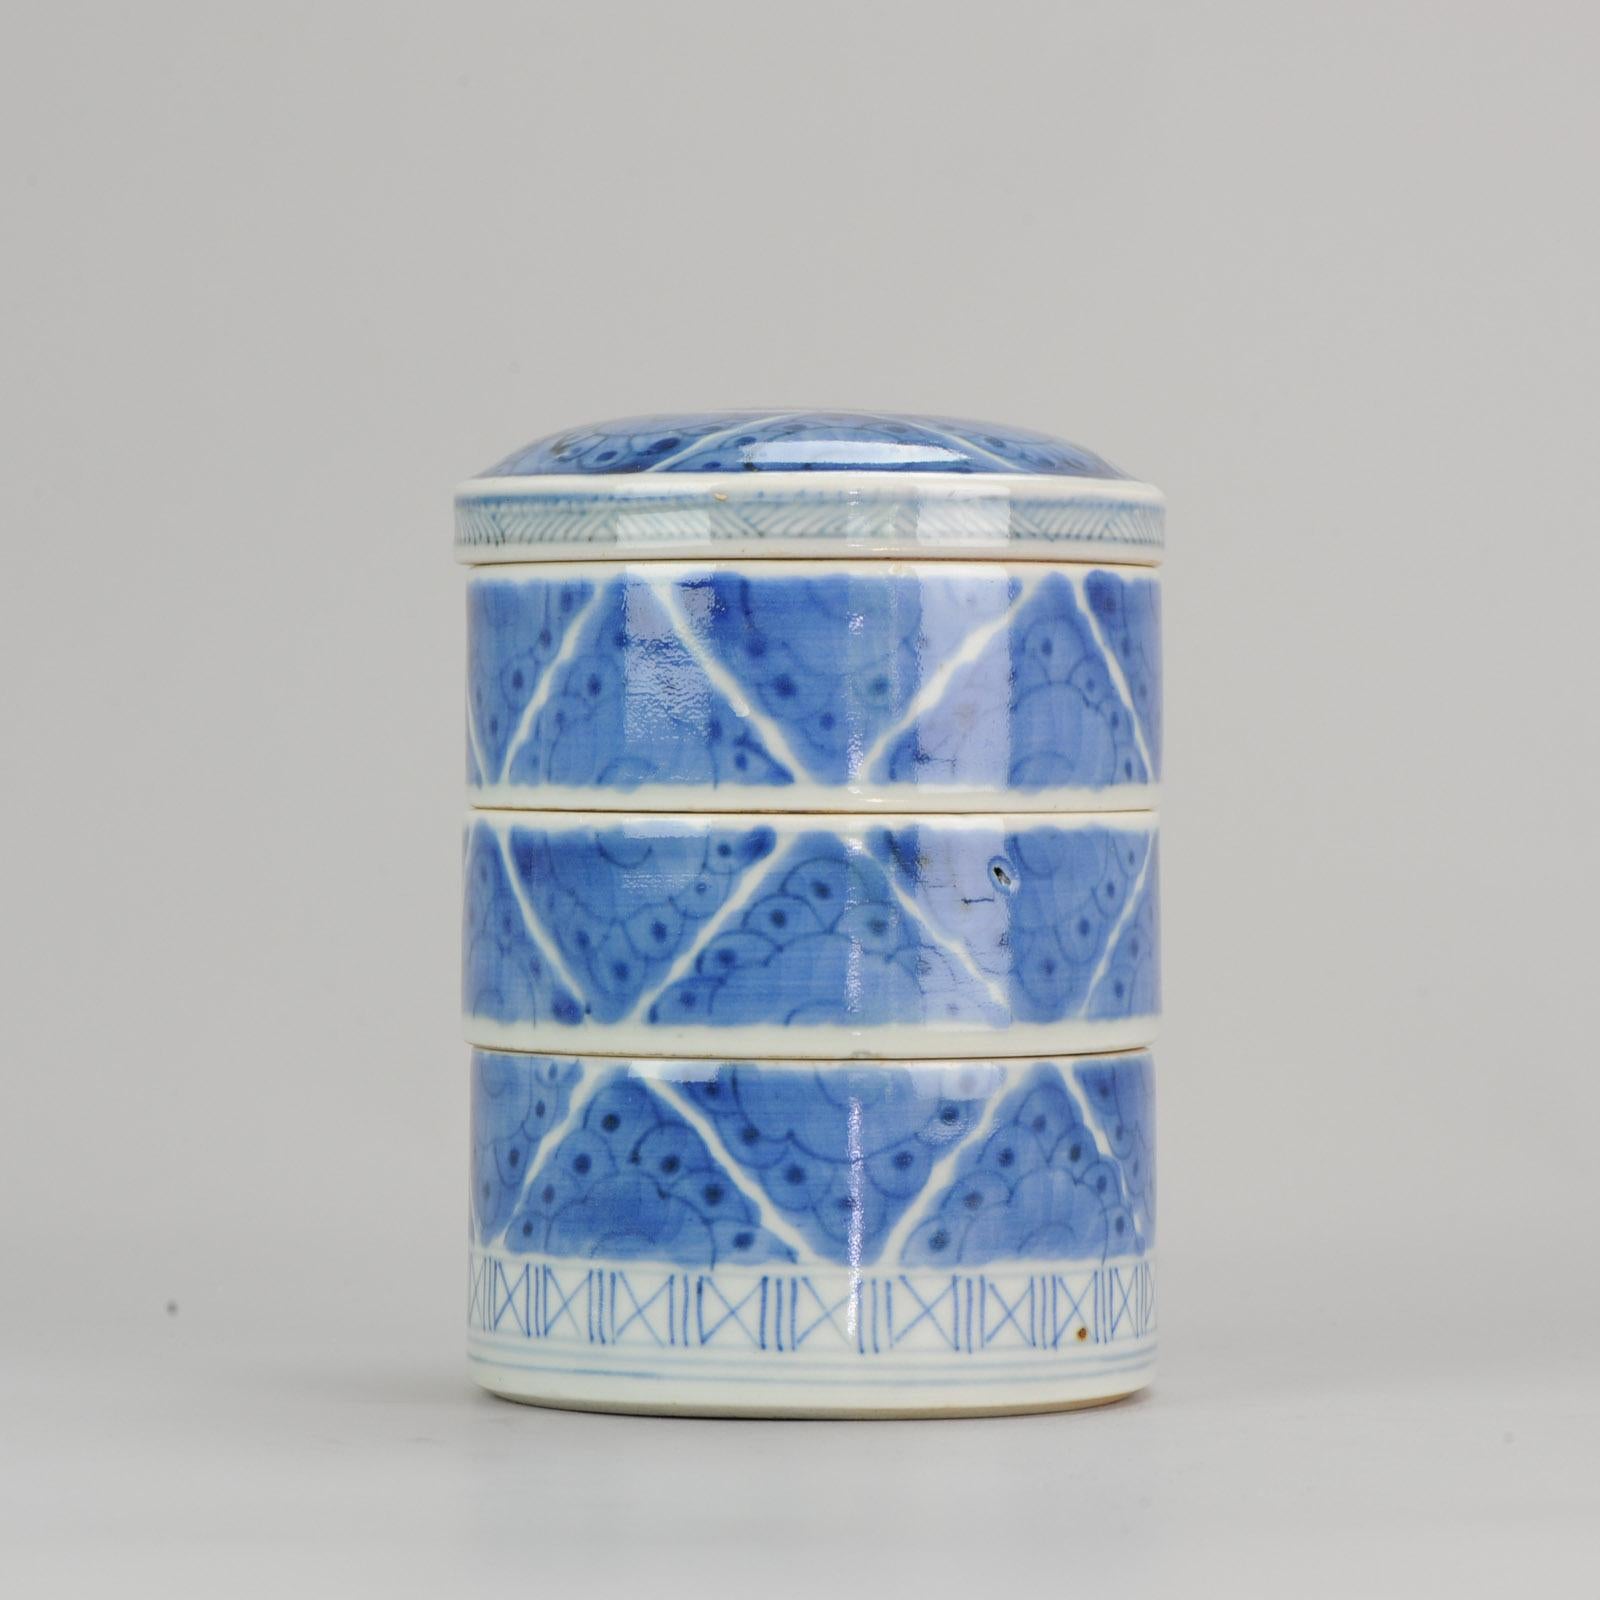 A nicely decorated food container whose separate porcelain trays are painted with a matching blue and white net pattern
Condition
Overall condition very good, some minimal rimfritting. Size: 155mm height
Period
19th century.